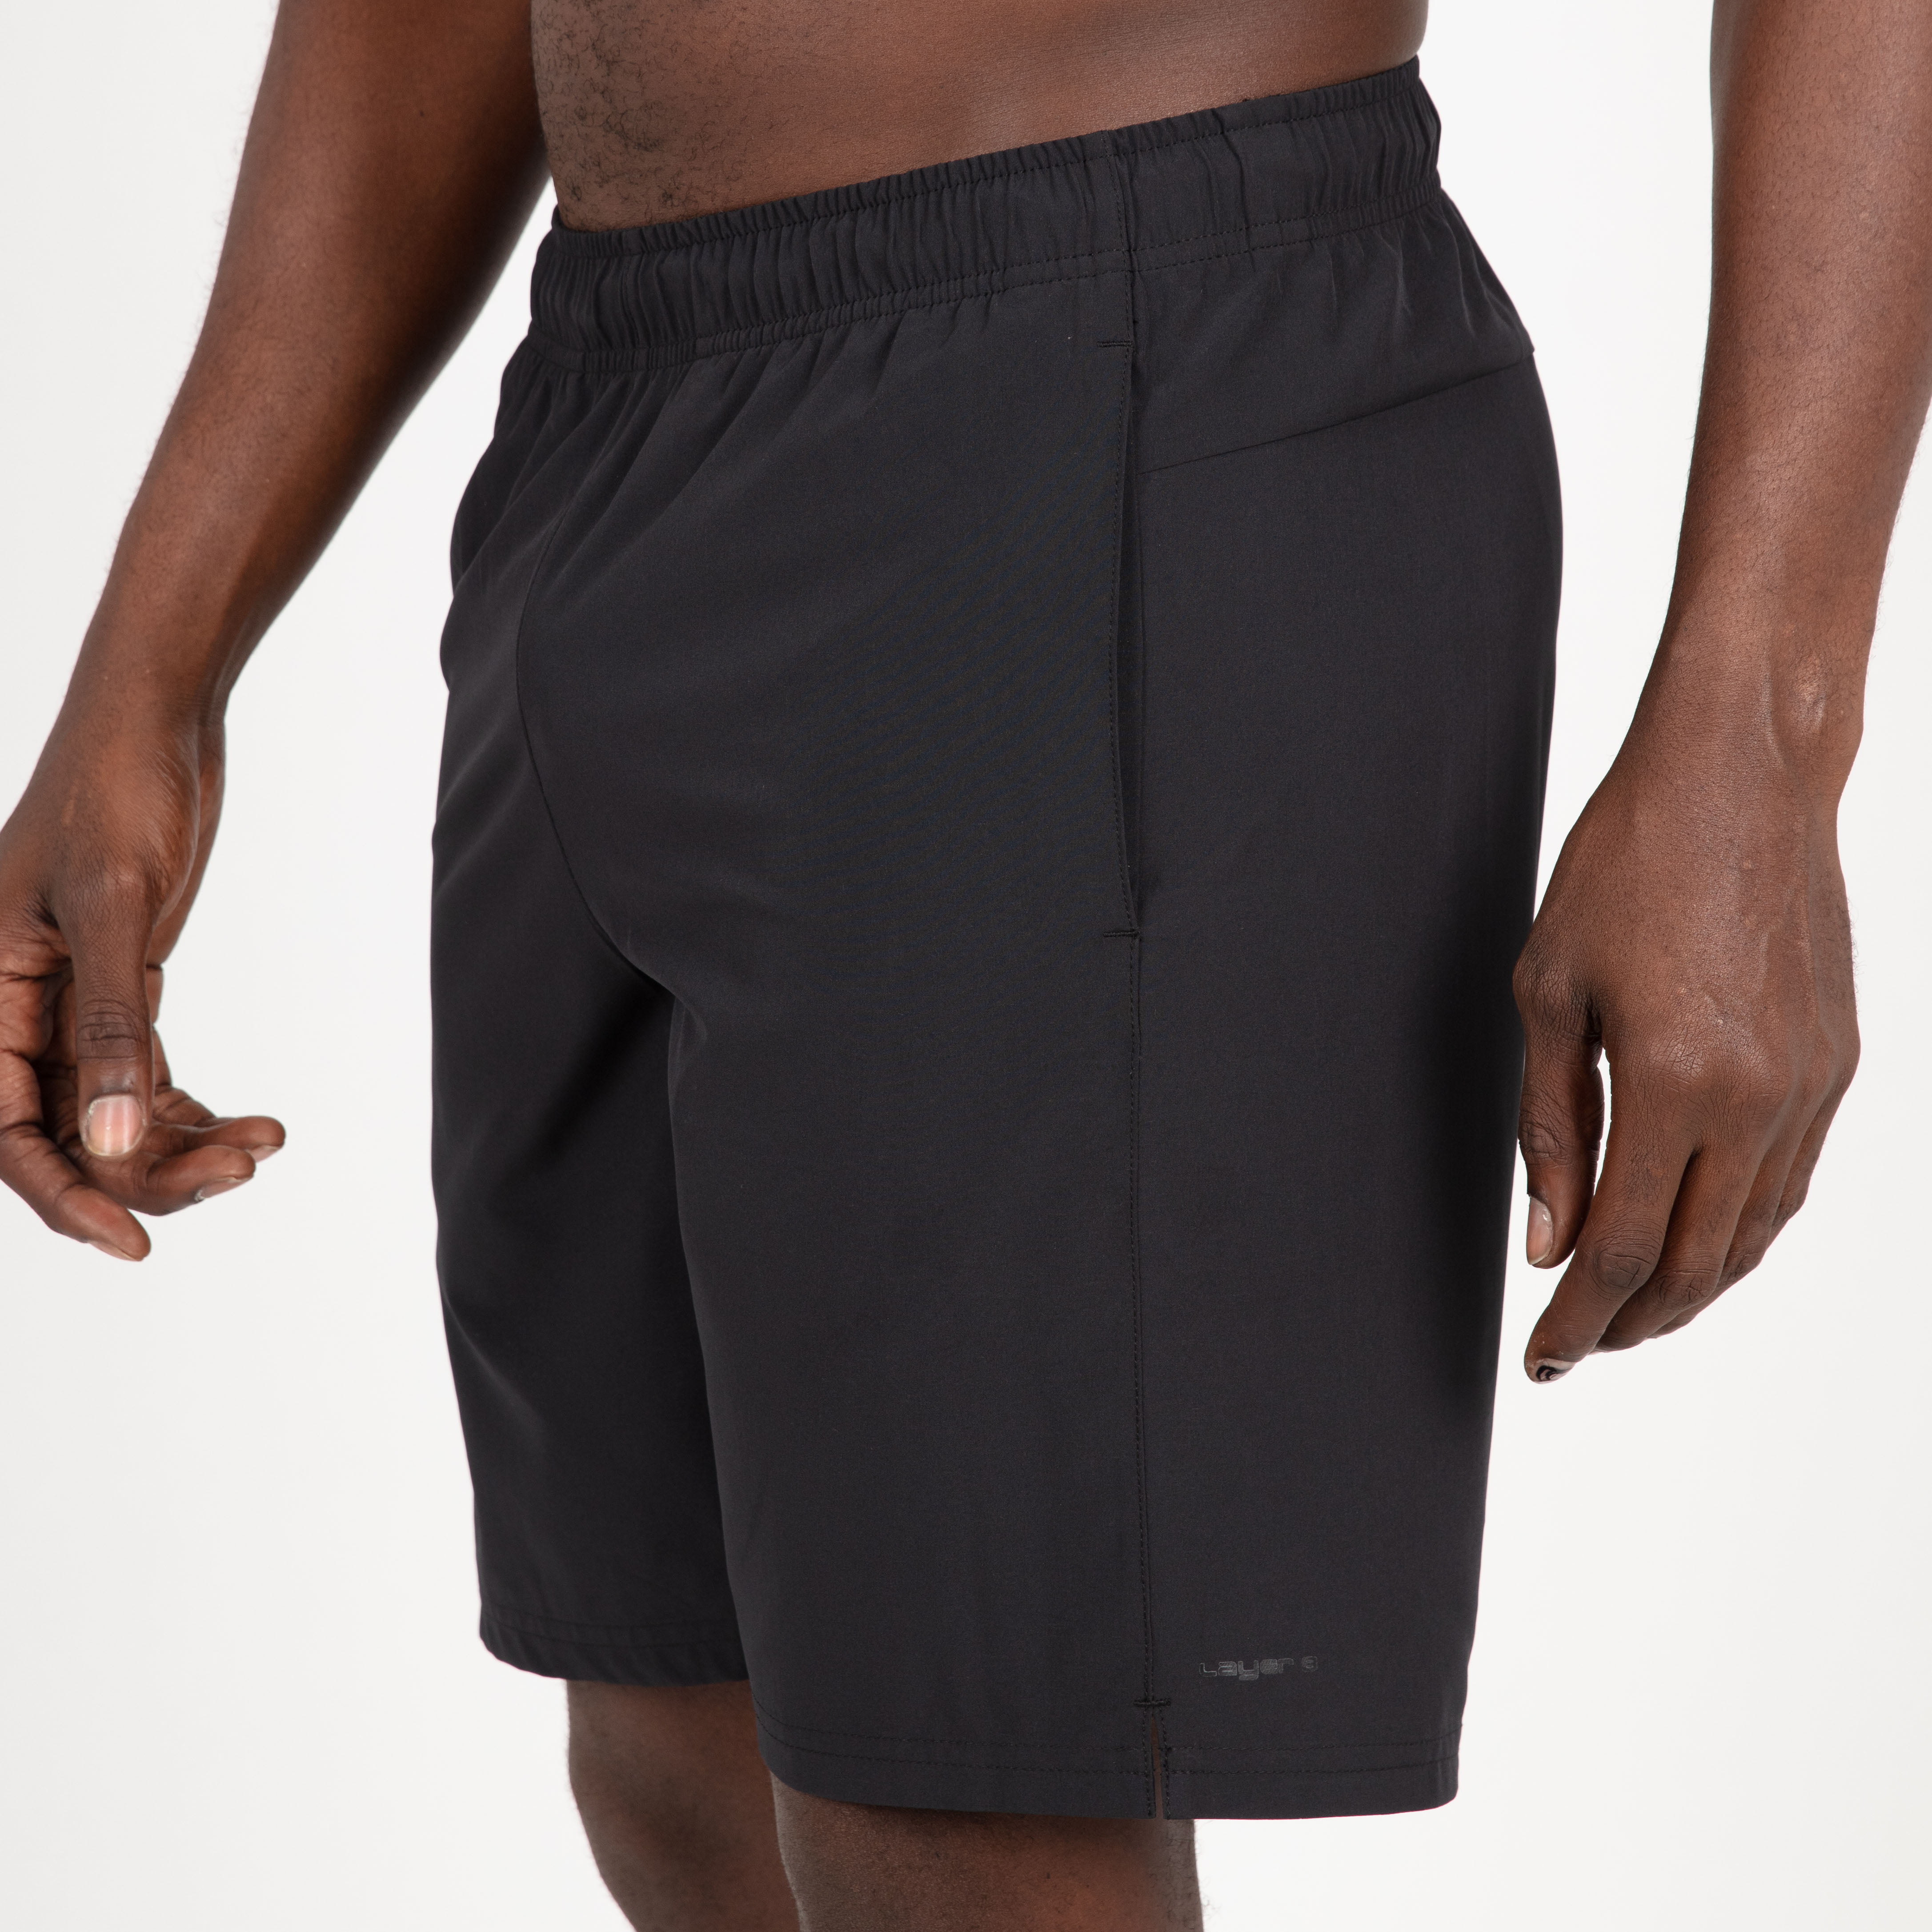 Layer 8 2-Pack Black & Gray Quick Dry Athletic Shorts Men's Size Large L  NWT